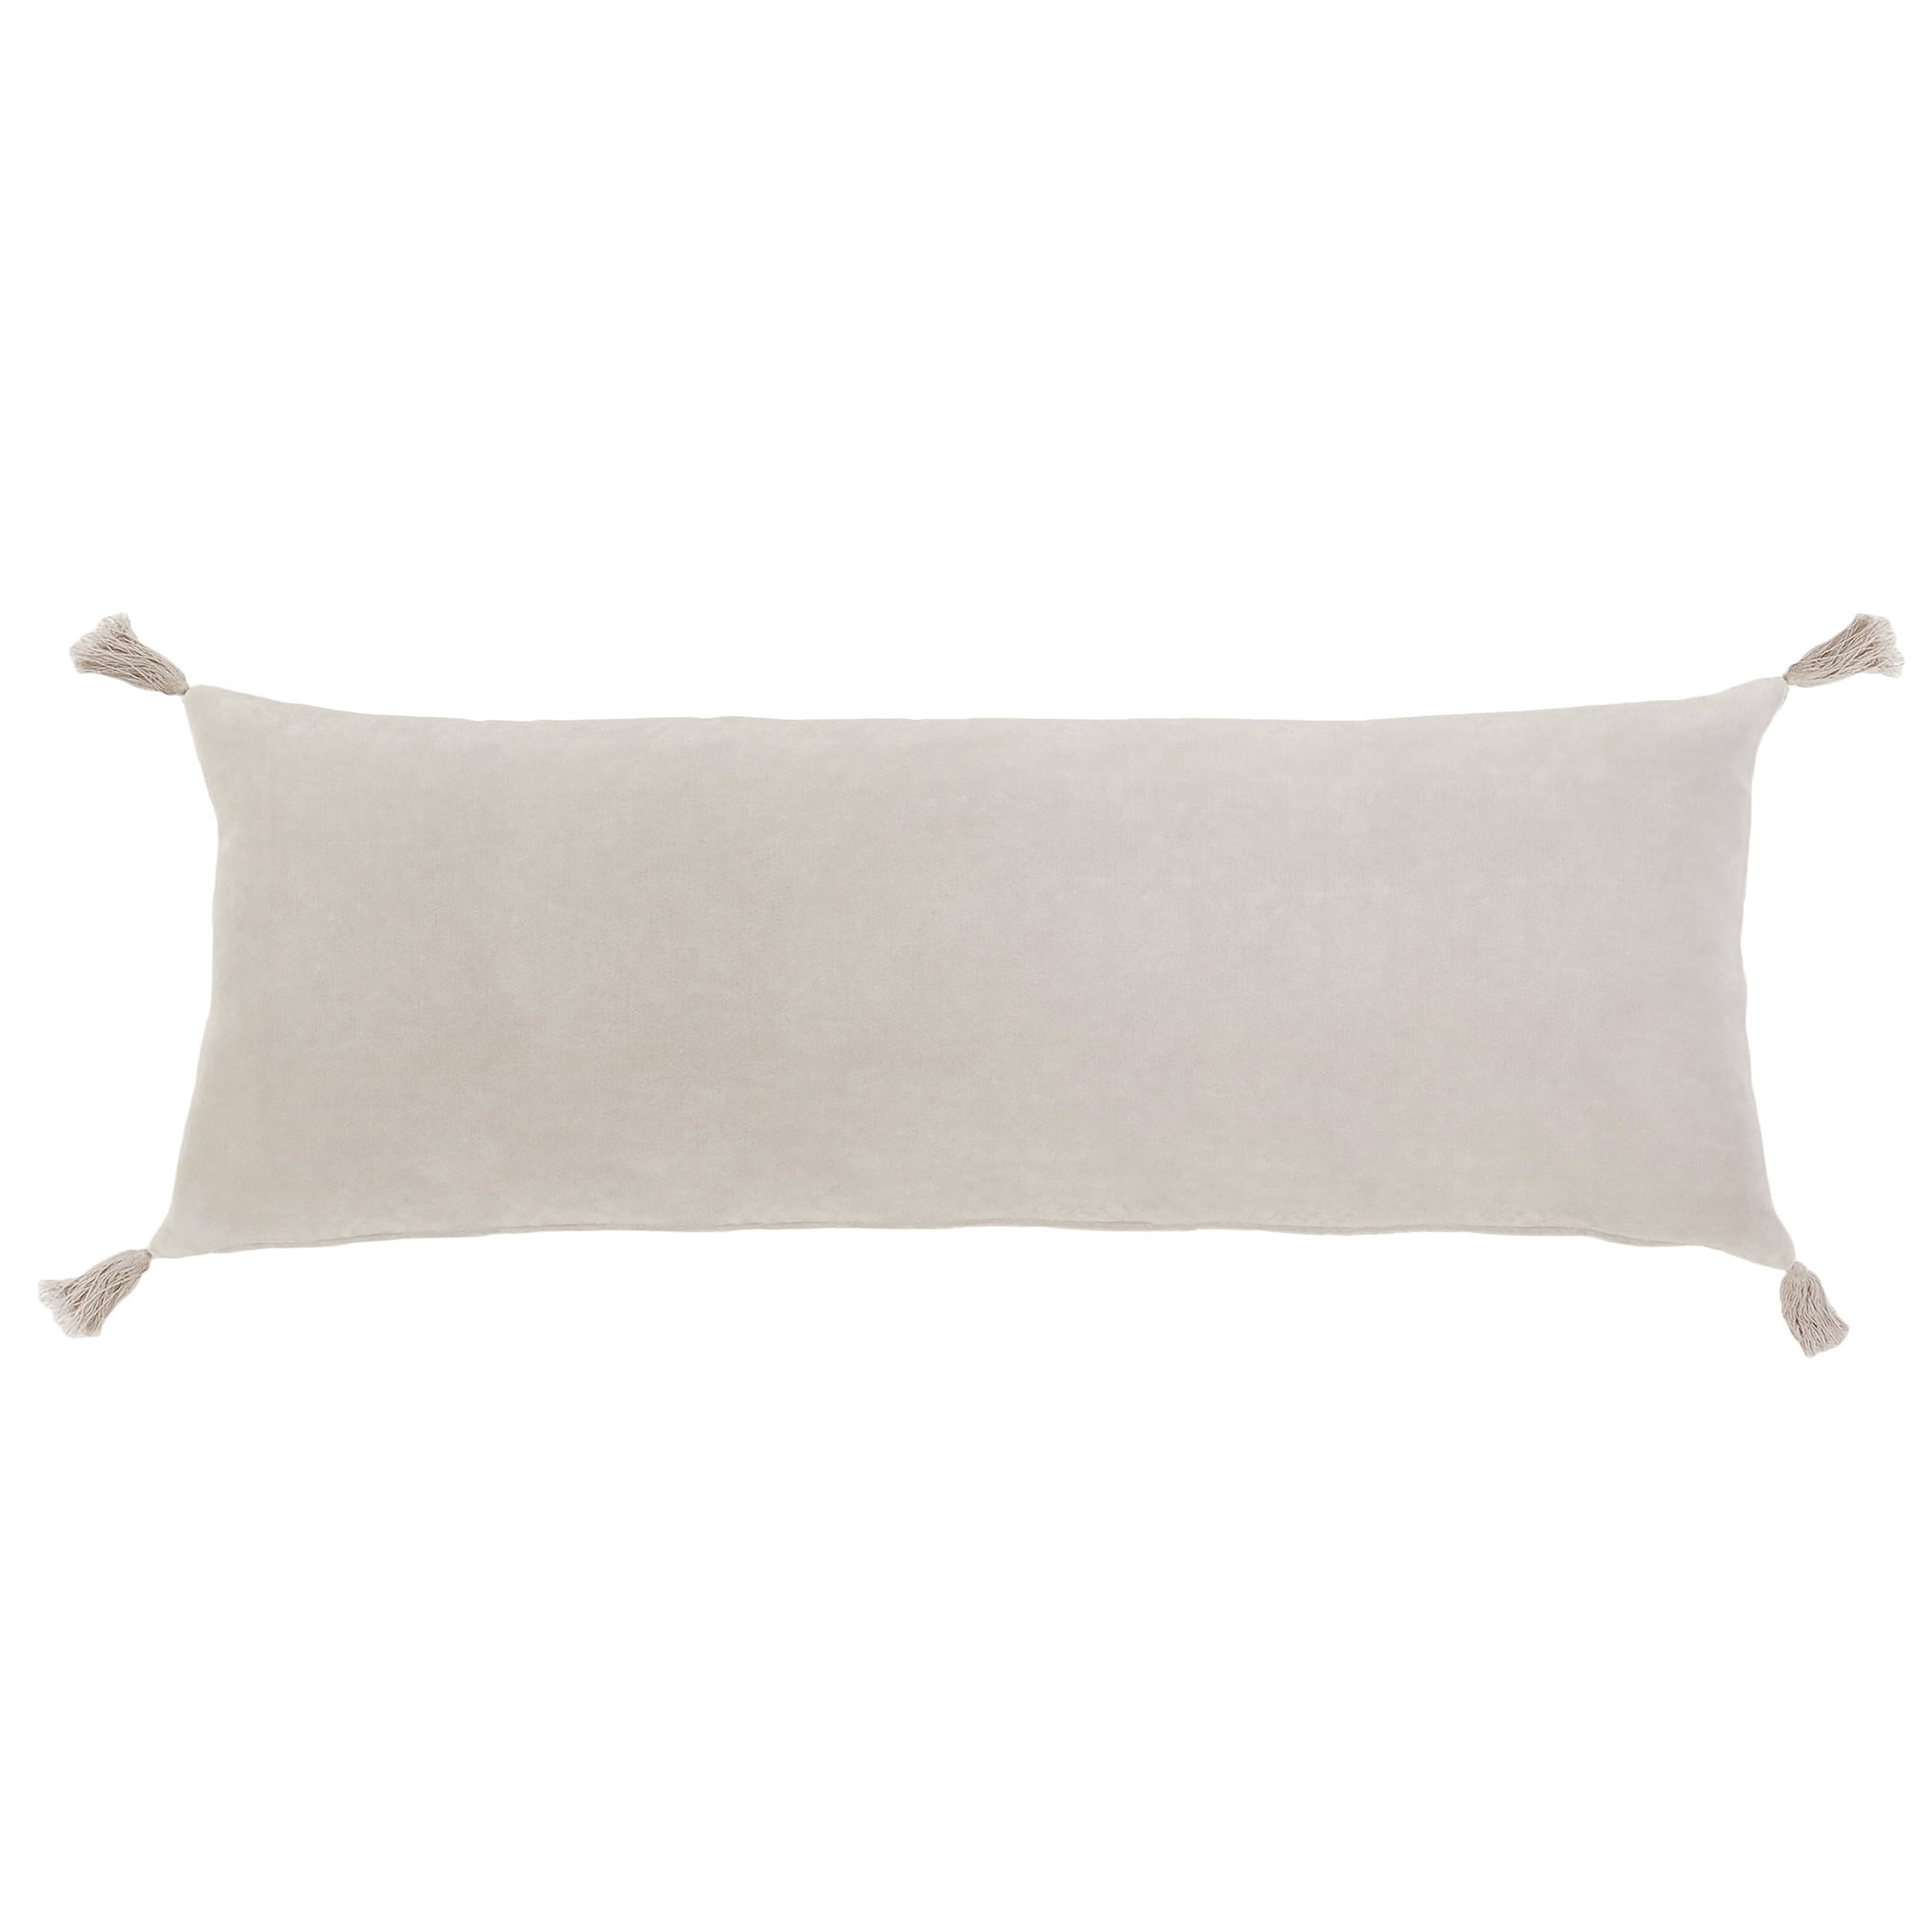 Bianca 14"x40" Pillow with Insert - Blush Color -Pom Pom at Home